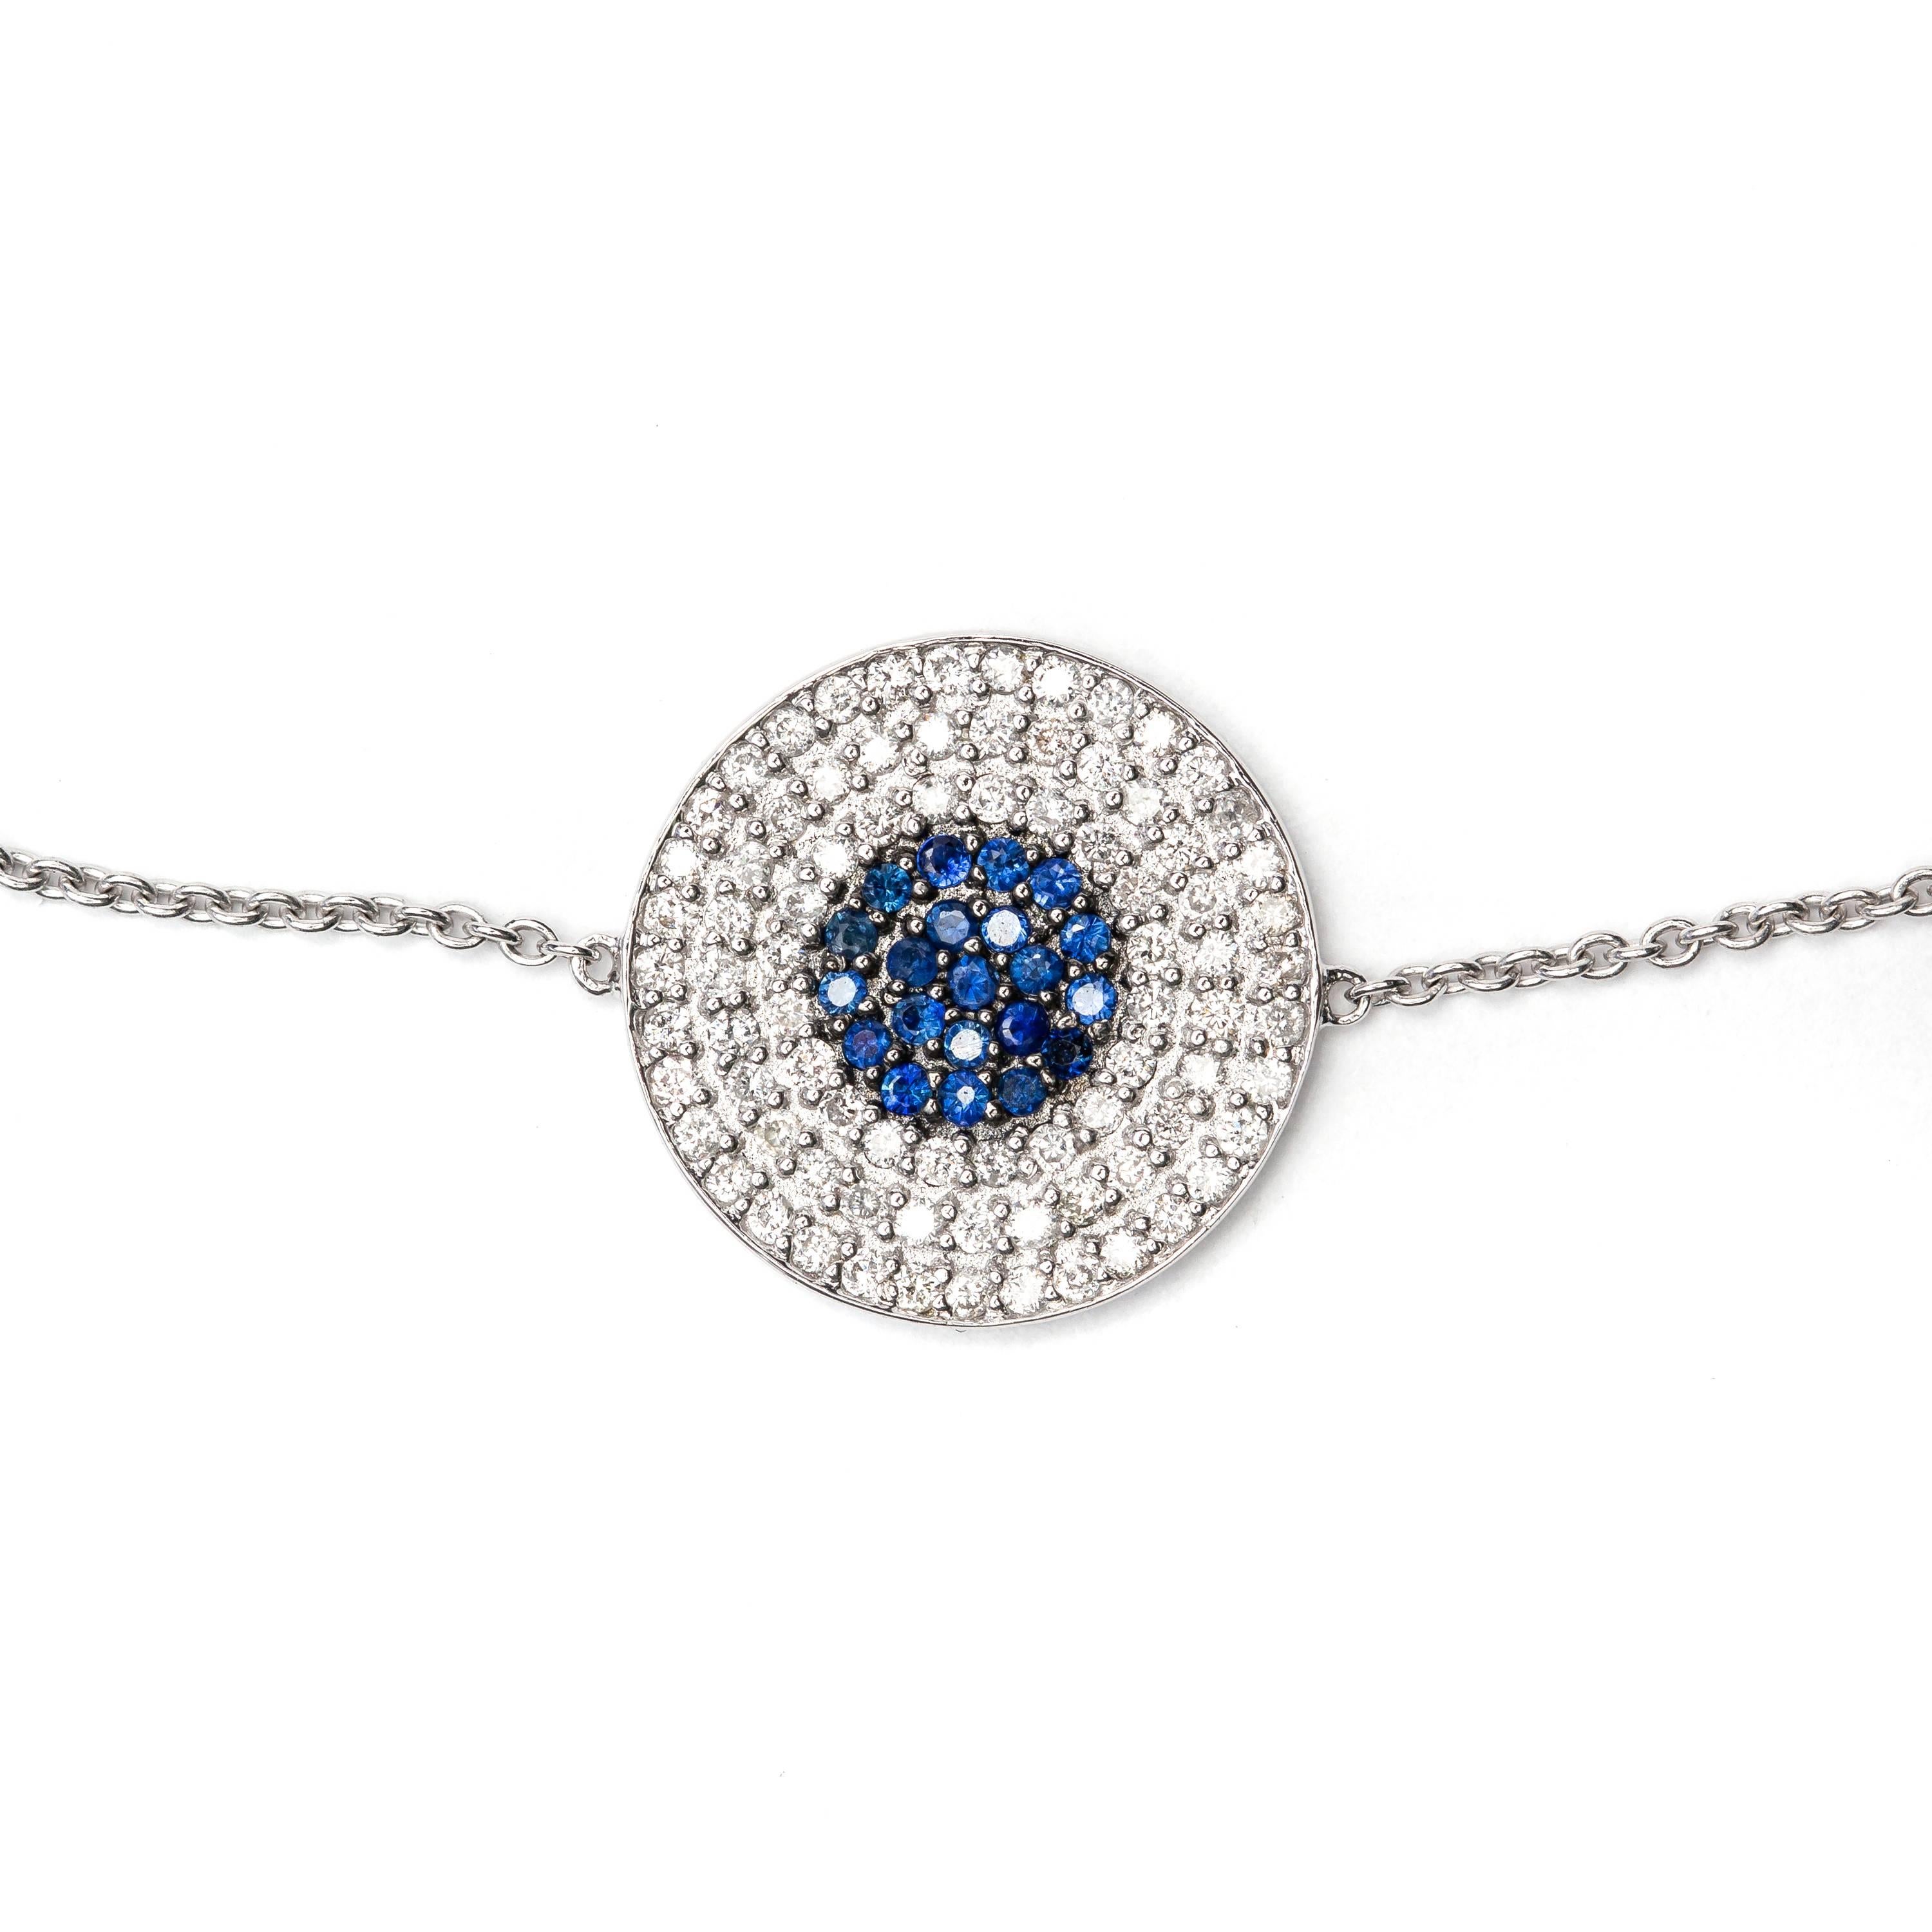 This luxurious 0.25ct H-SI1 Round Brilliant Diamond bracelet sparkles stunningly featuring 0.25ct Blue Pavé sapphire in the center. Adorn your wrist with this elegant piece of jewelry set in 18 Karat White Gold.